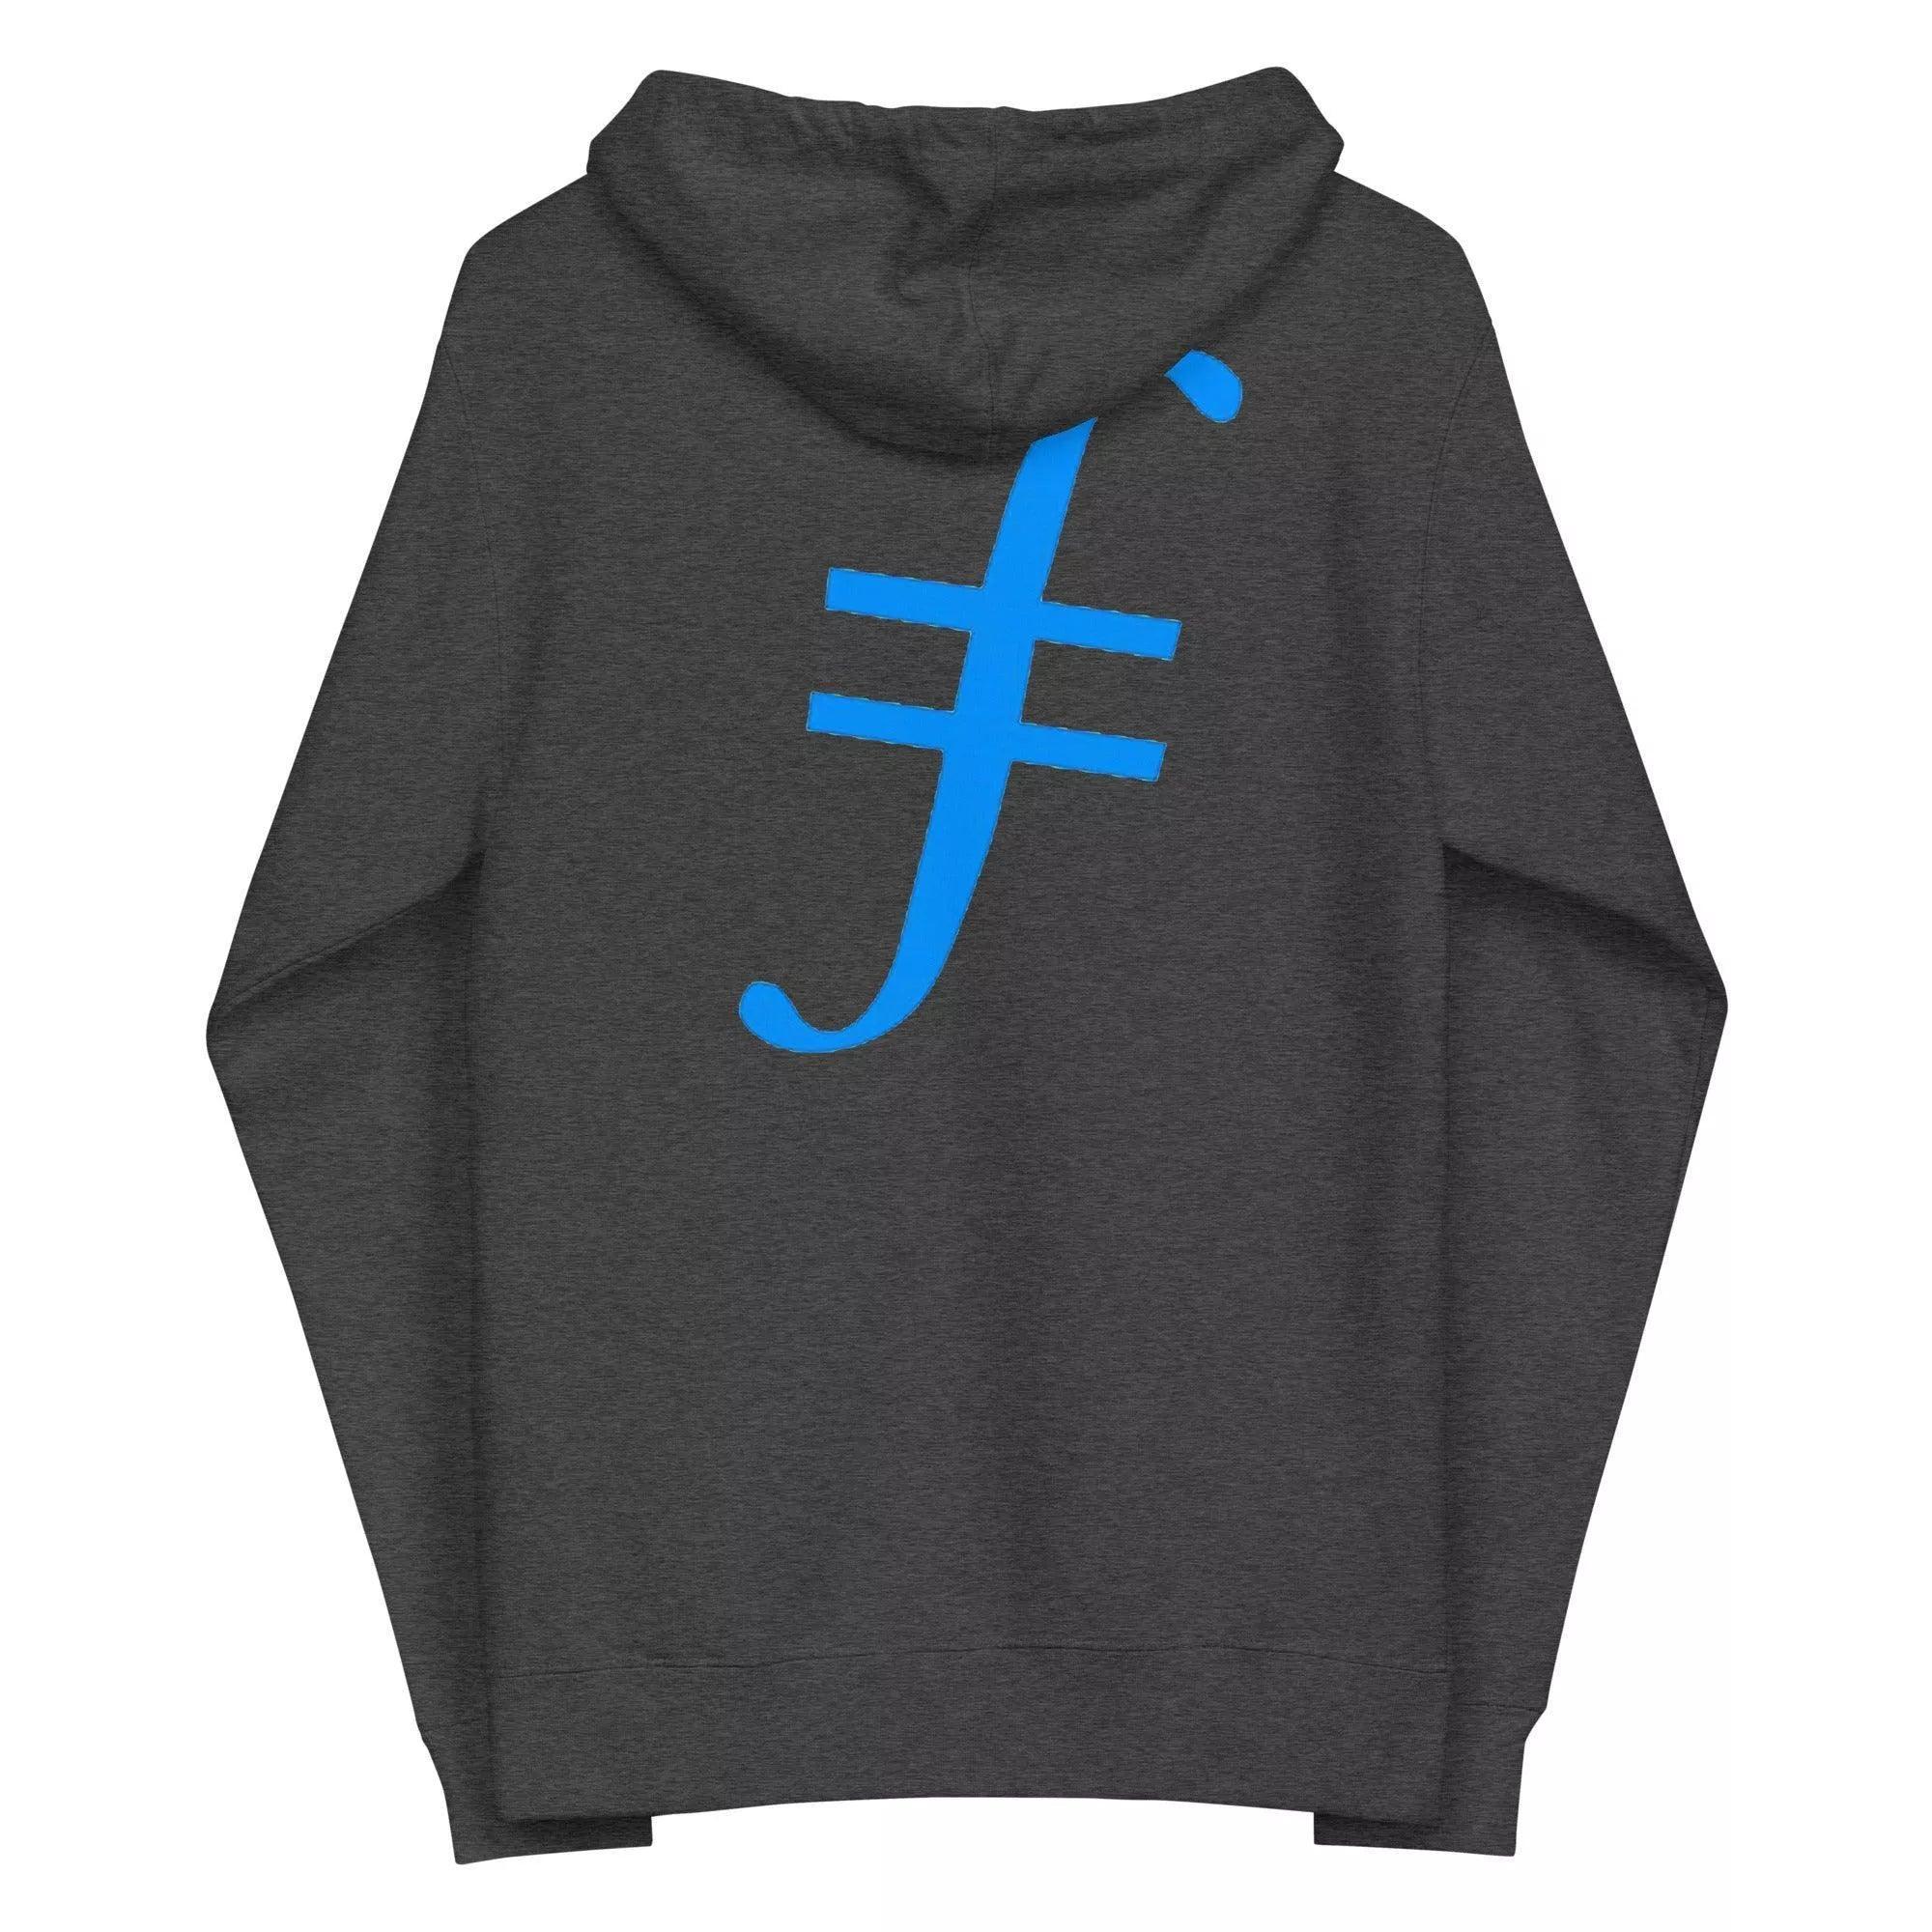 Filecoin Zip Up Hoodie - InvestmenTees